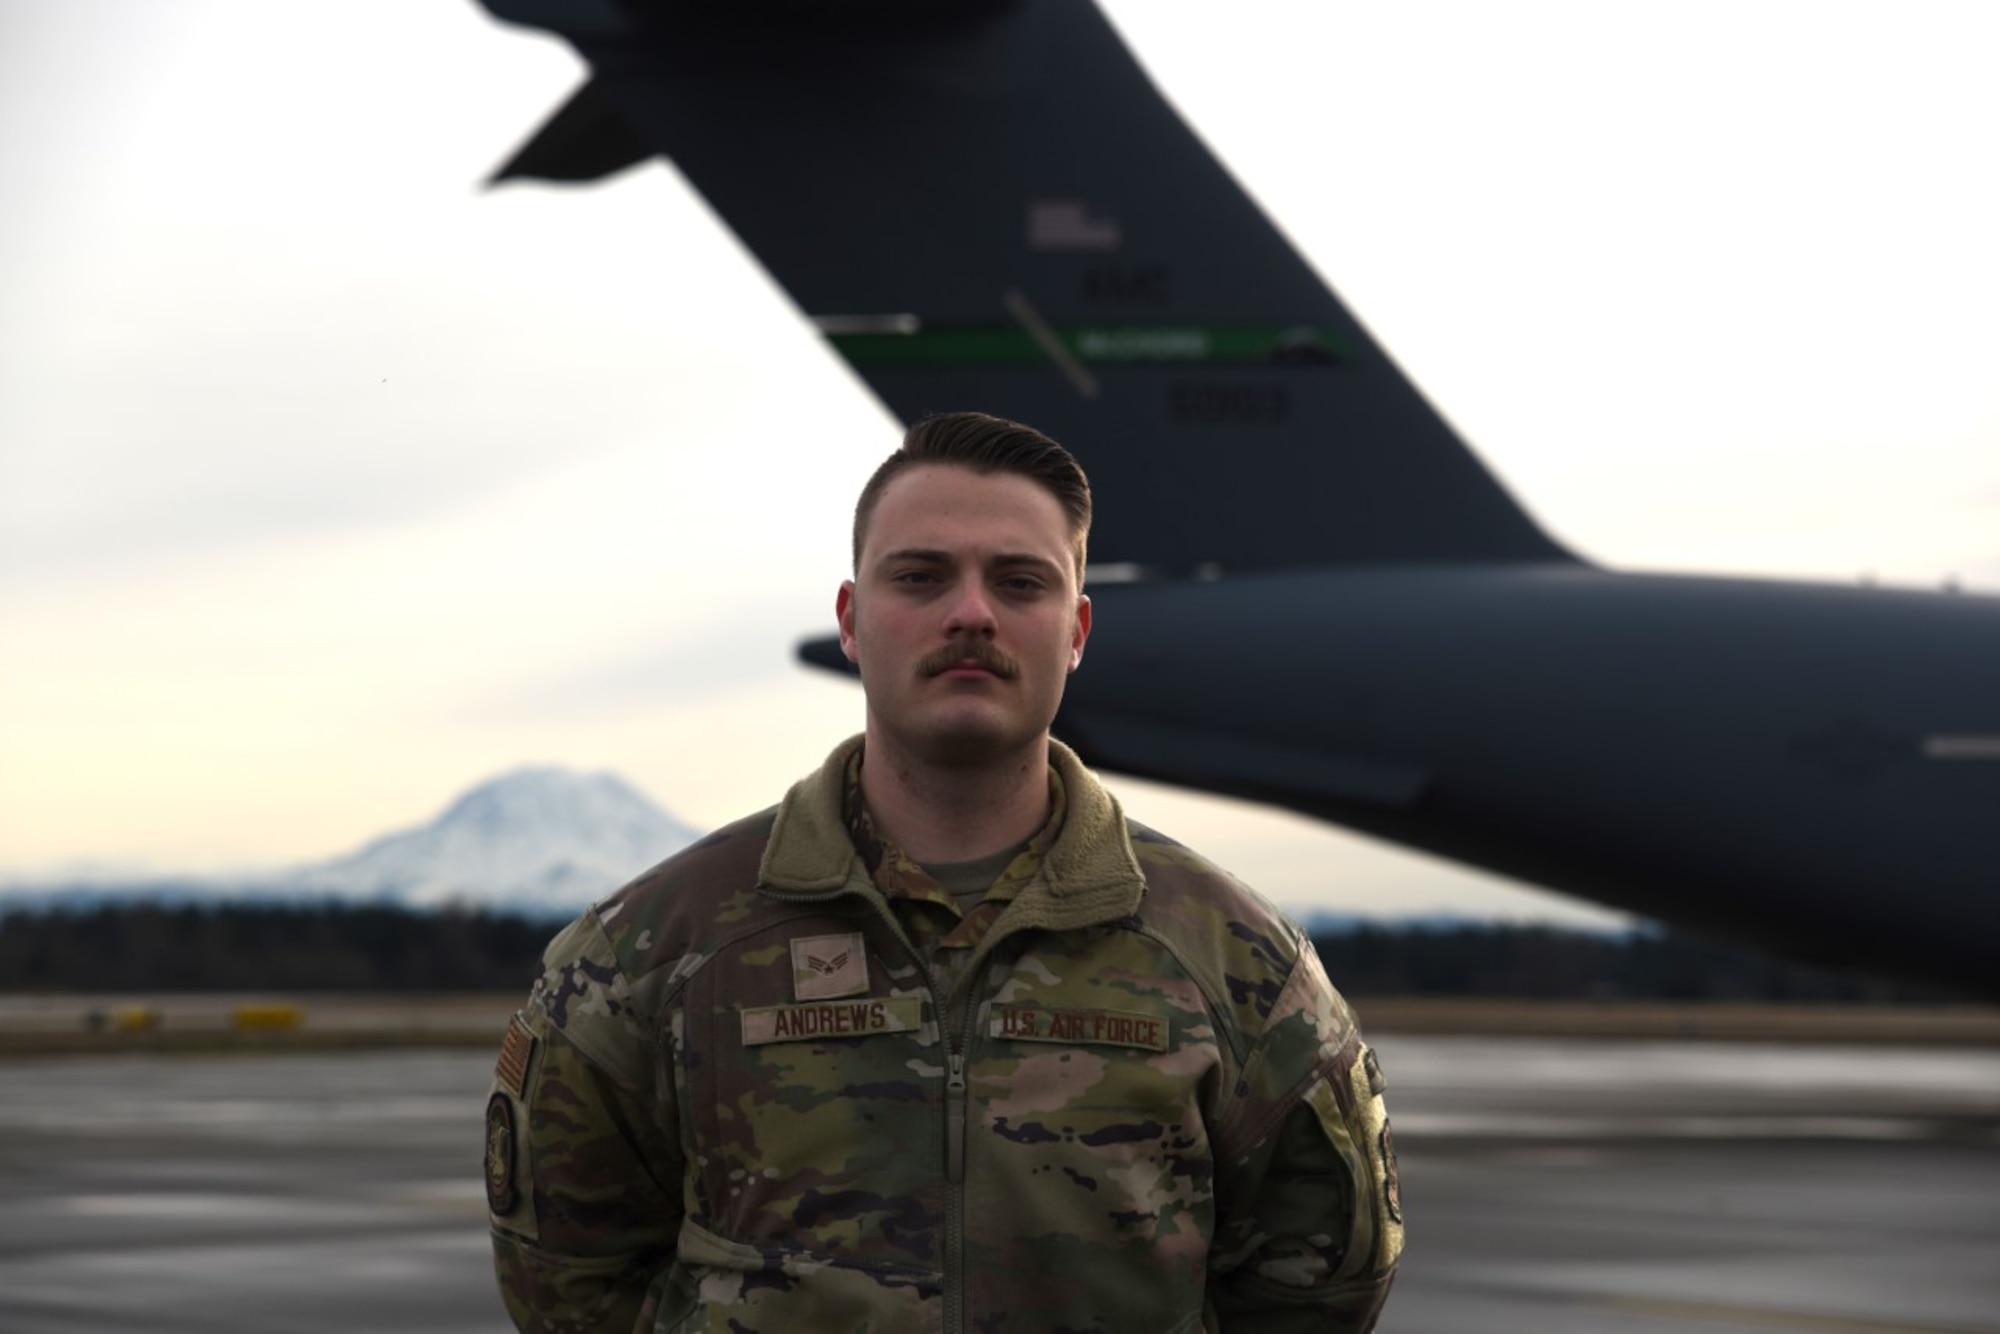 U.S. Air Force Senior Airman Austin Andrews, a loadmaster with the 4th Airlift Squadron, poses for a photo on the flightline at Joint Base Lewis-McChord, Washington, Jan. 4, 2023. In 2022, Andrews was awarded the Staff Sgt. Henry E. “Red” Erwin award. This award is given annually to one flight engineer, loadmaster, air surveillance operator or other related career field for their outstanding leadership and sustained self-improvements in support of enlisted aircrew operations. (U.S. Air Force photo by Airman Kylee Tyus).